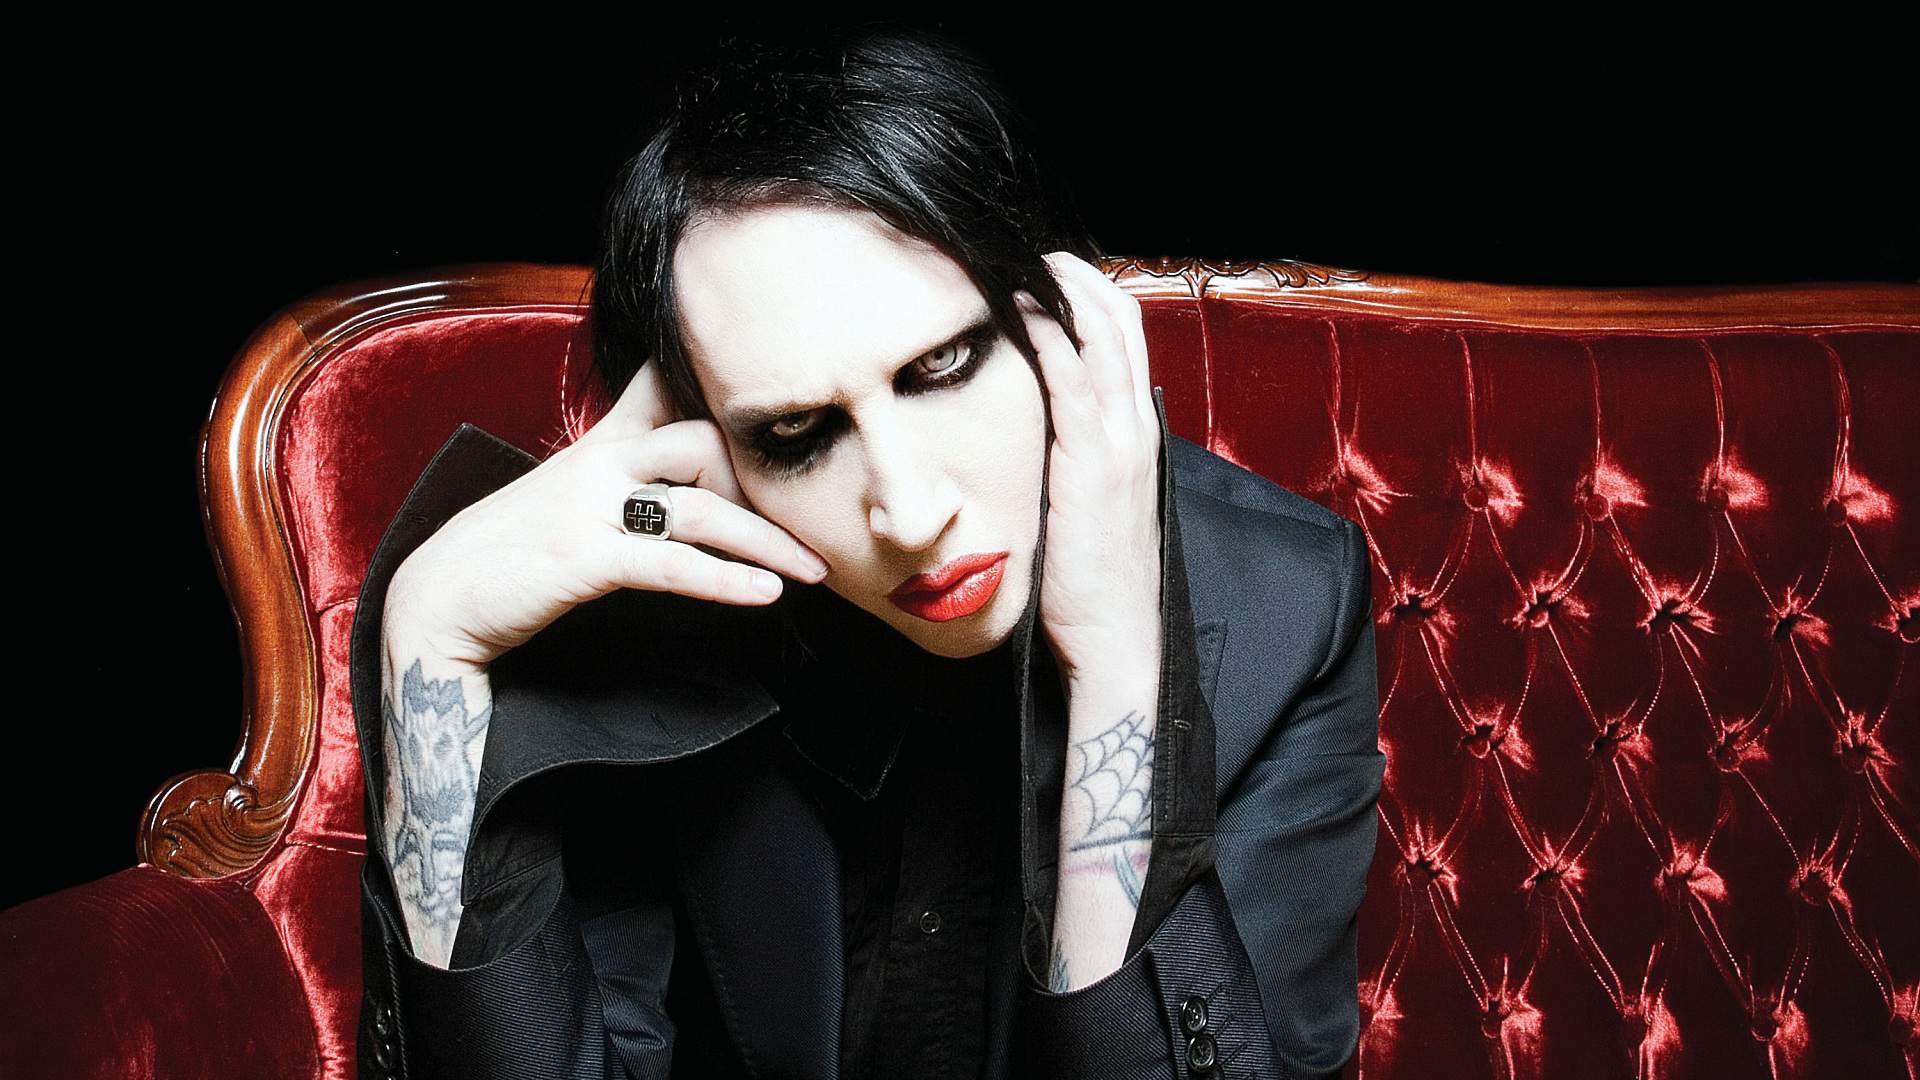 Marilyn Manson tour dates 2017. Concerts, Tickets, Music